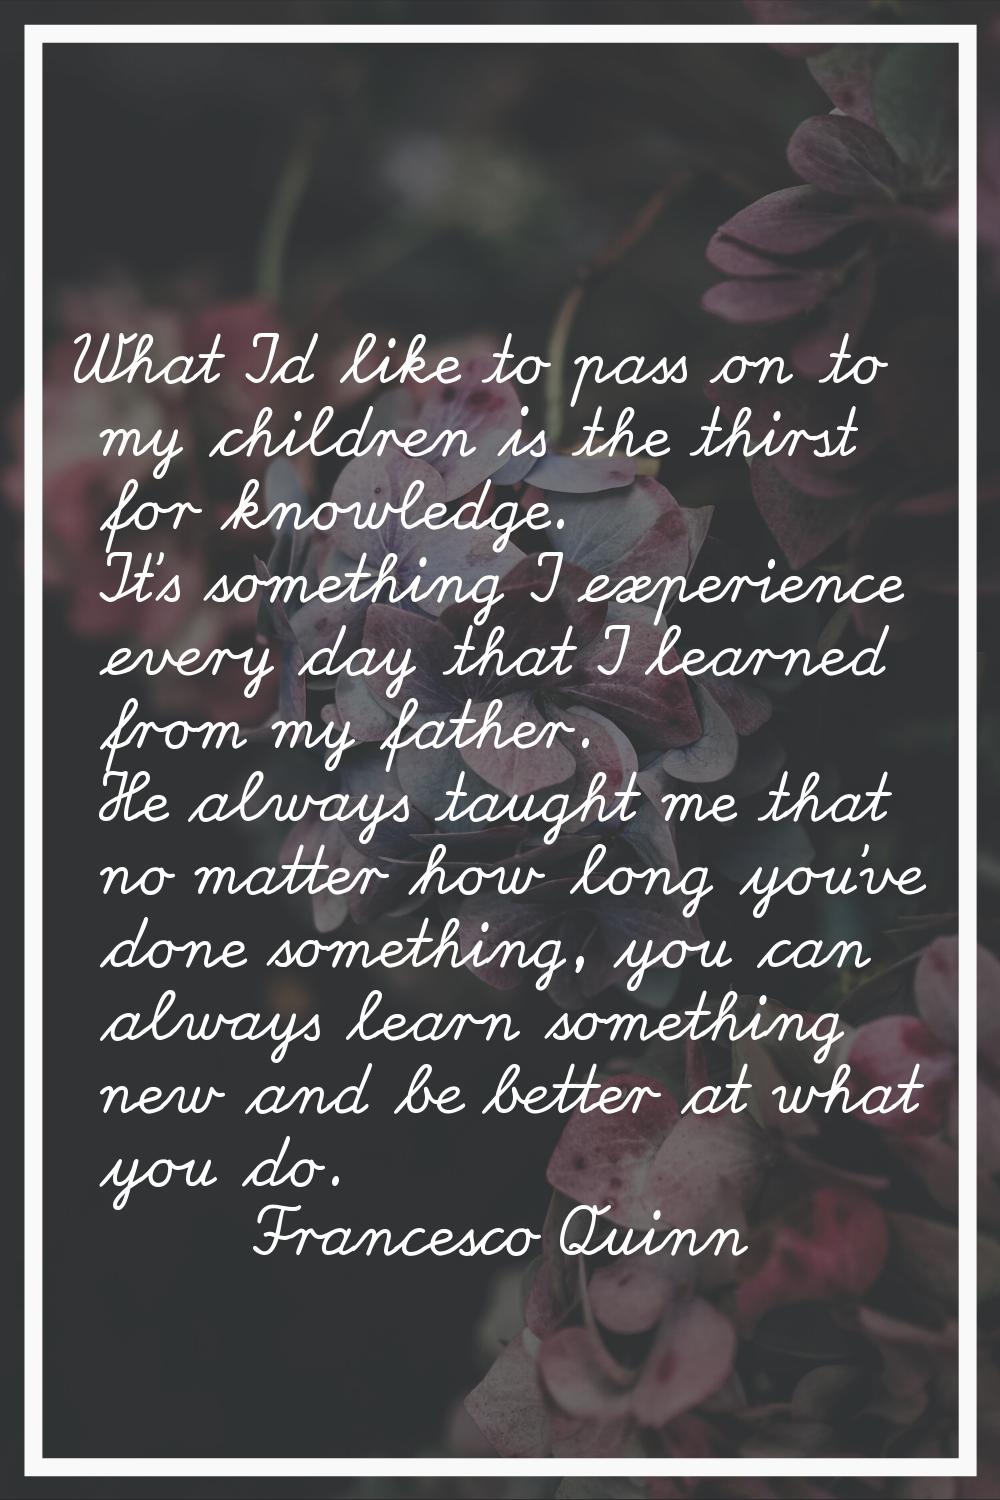 What I'd like to pass on to my children is the thirst for knowledge. It's something I experience ev